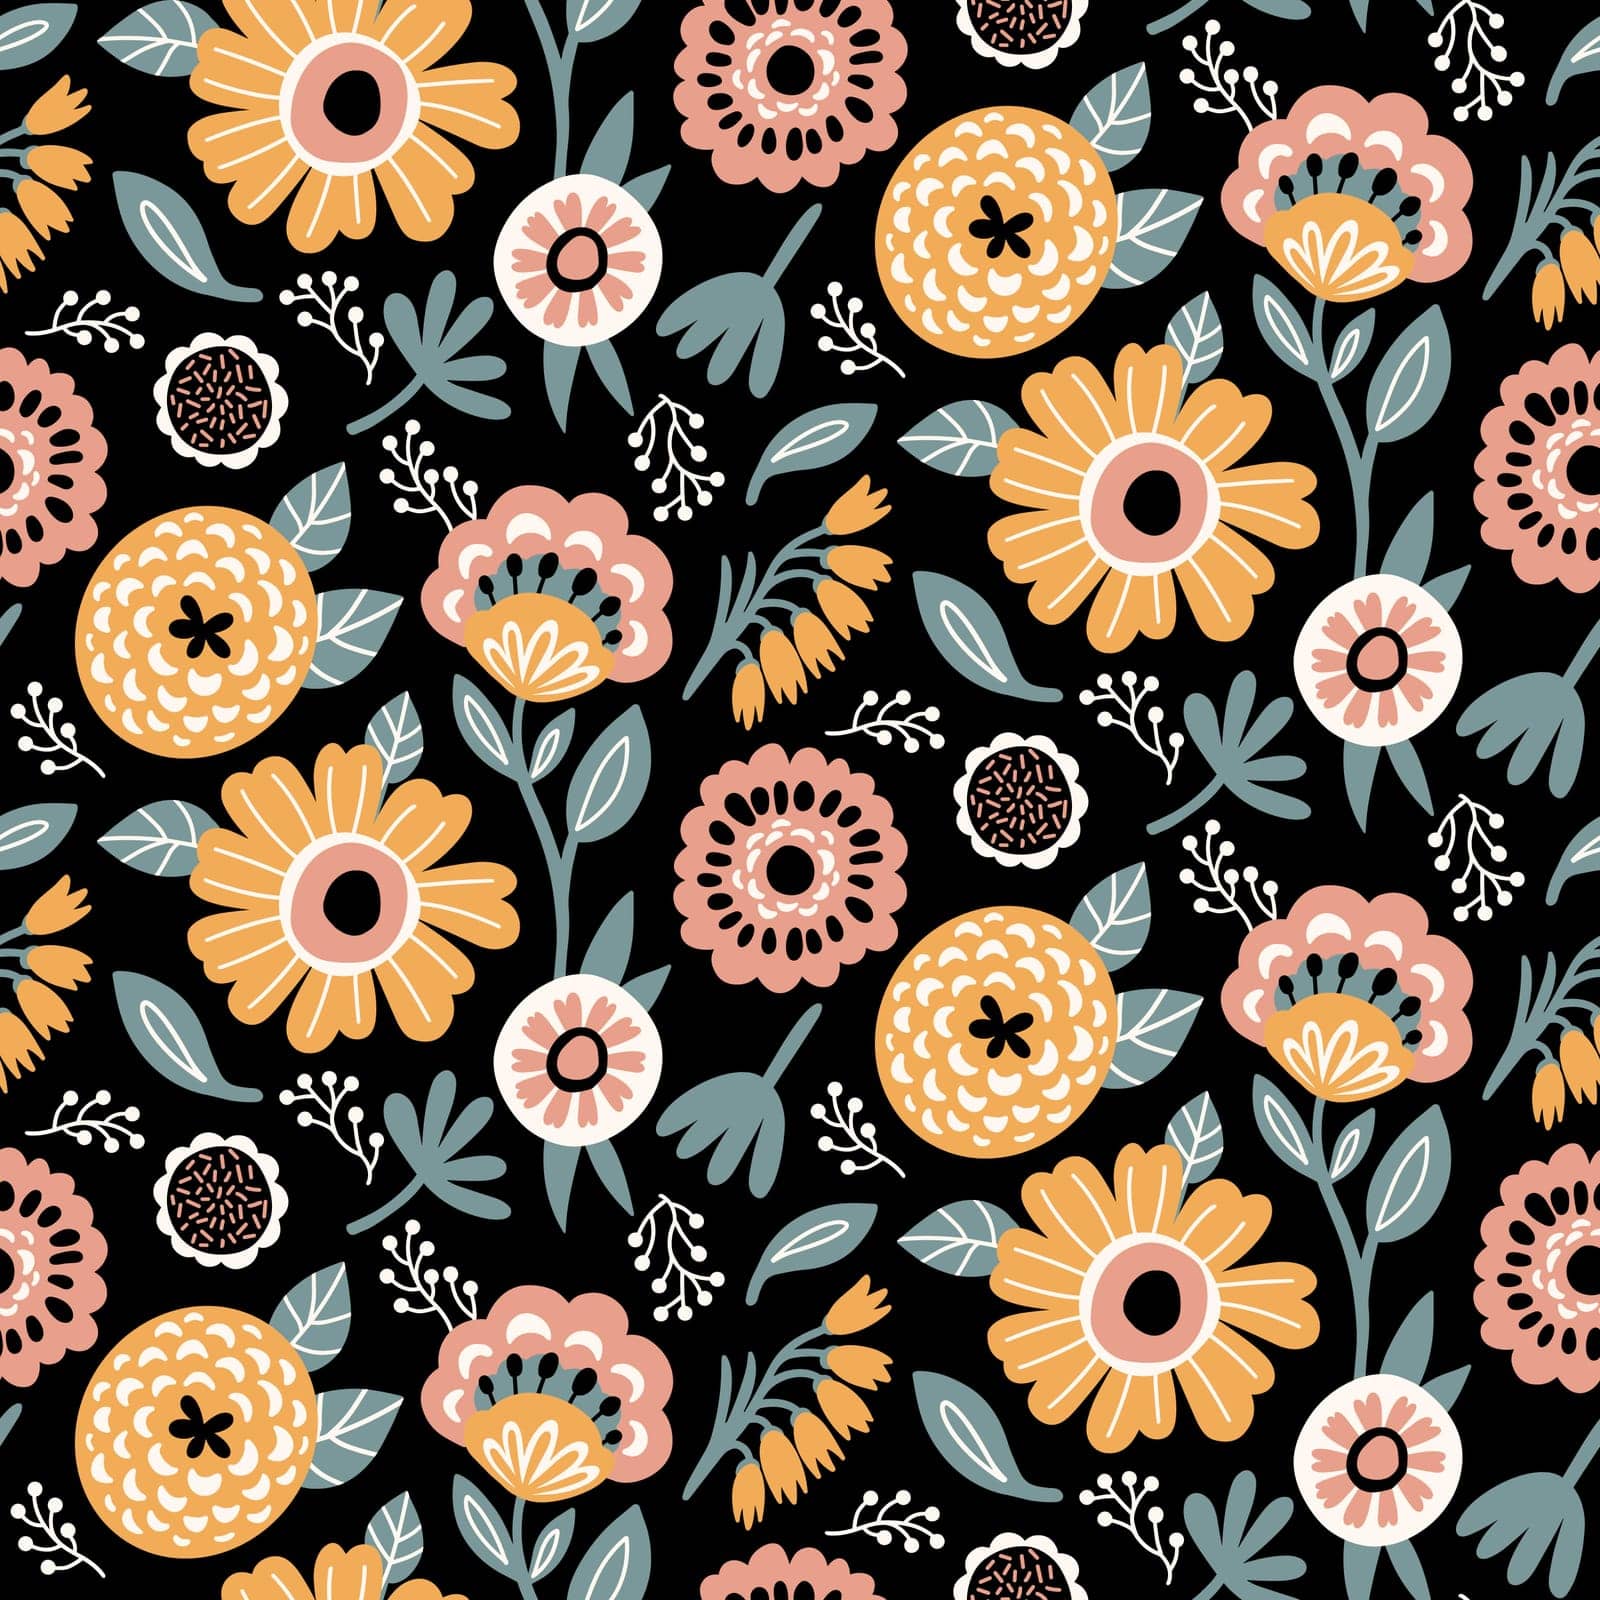 Floral Seamless Pattern of Flowers and Leaves in five Colors Yellow, White, Pink Peach, Grey Green on Black Backdrop, Wallpaper Design for Textiles, Papers Prints, Fashion Backgrounds, Beauty Products